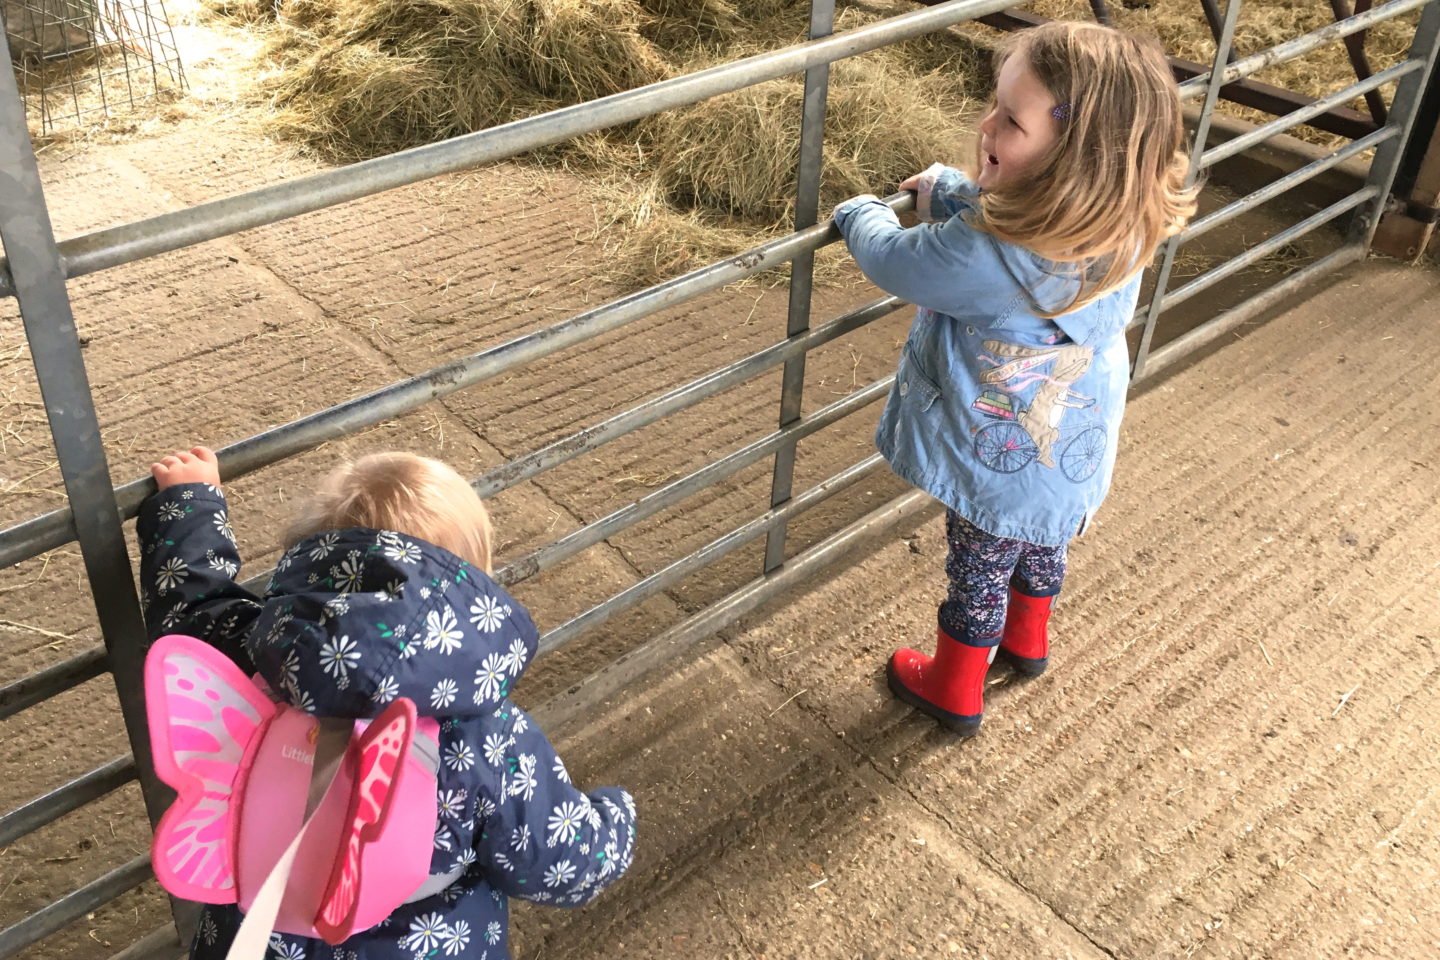 sisters standing together, looking into a farm pen